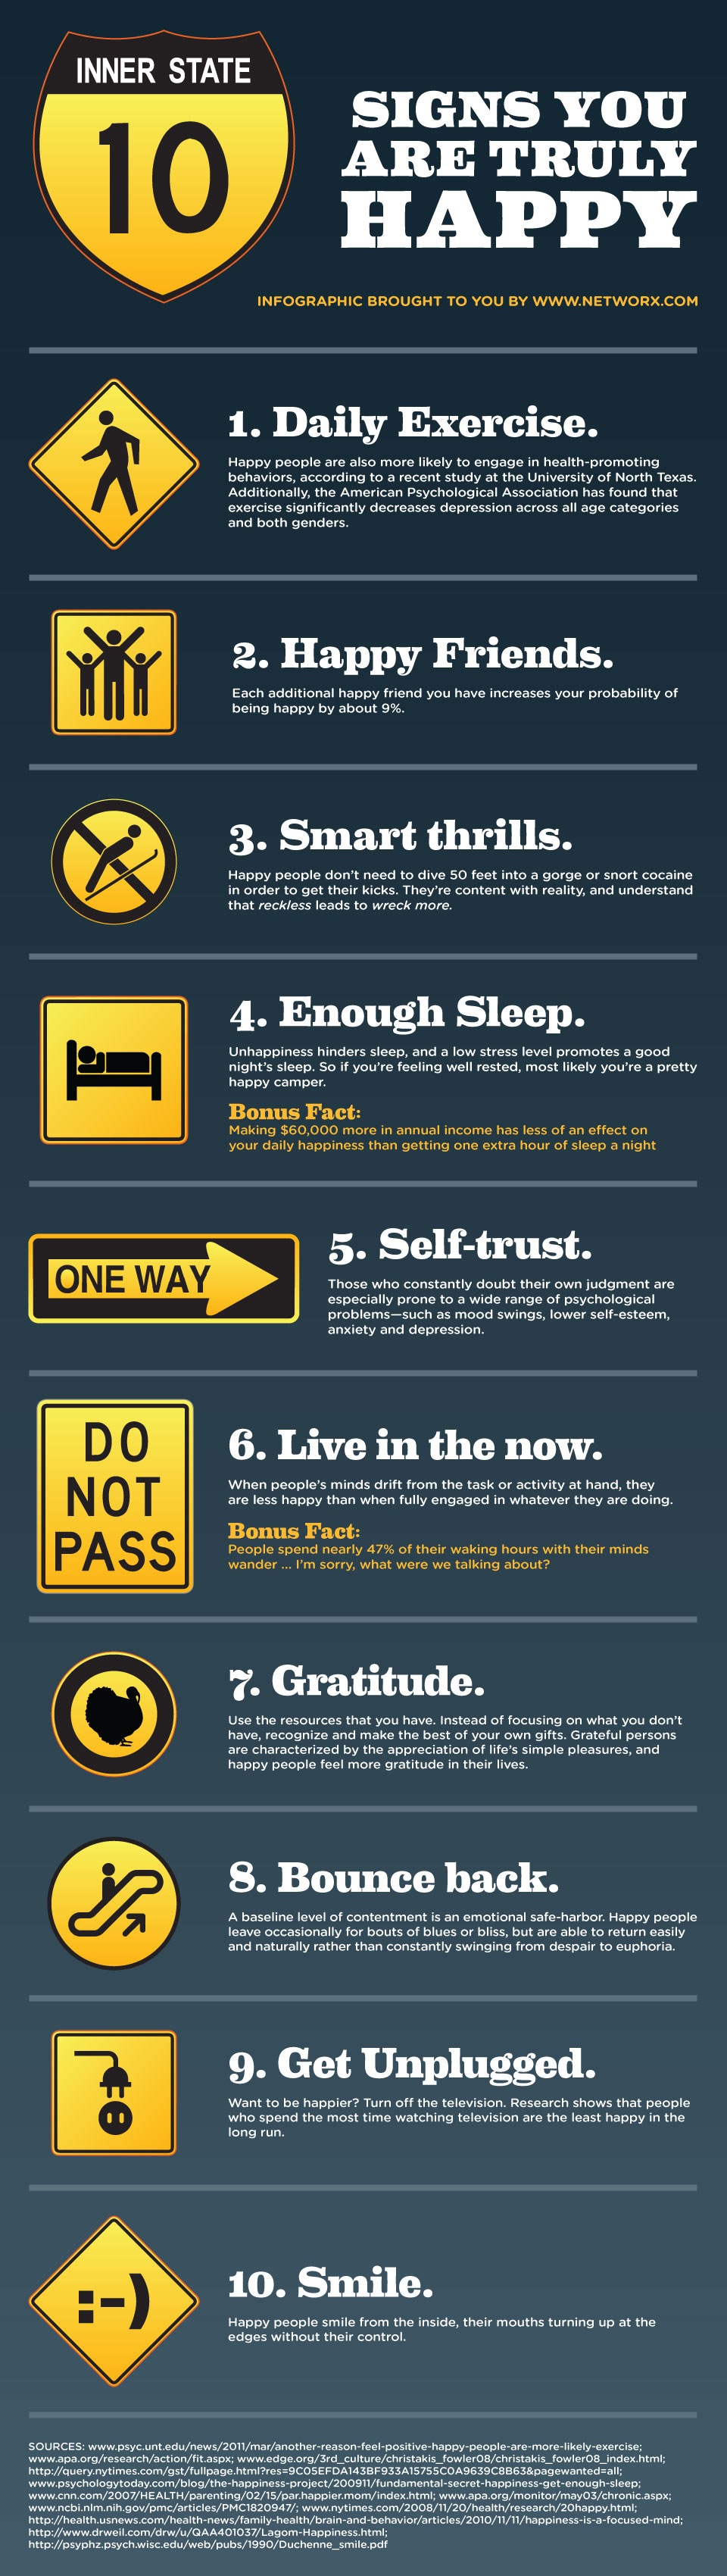 10 Signs of True Happiness - Networx